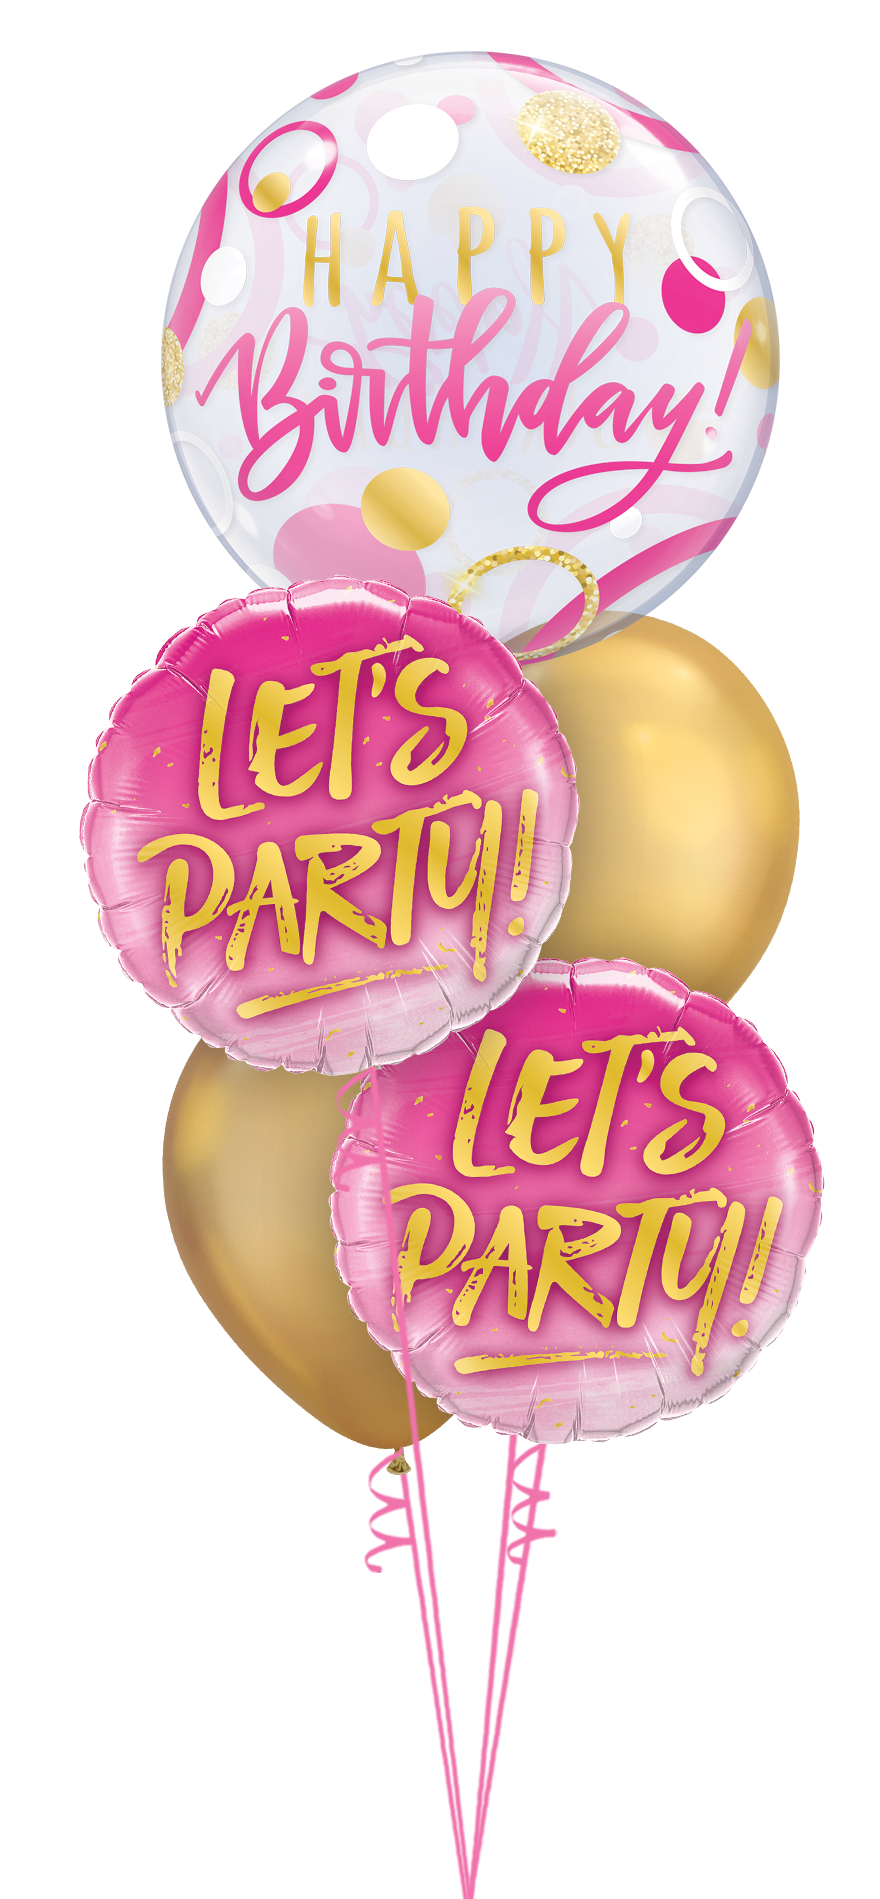 “Let’s Party!” Pink & Gold Birthday Bubble